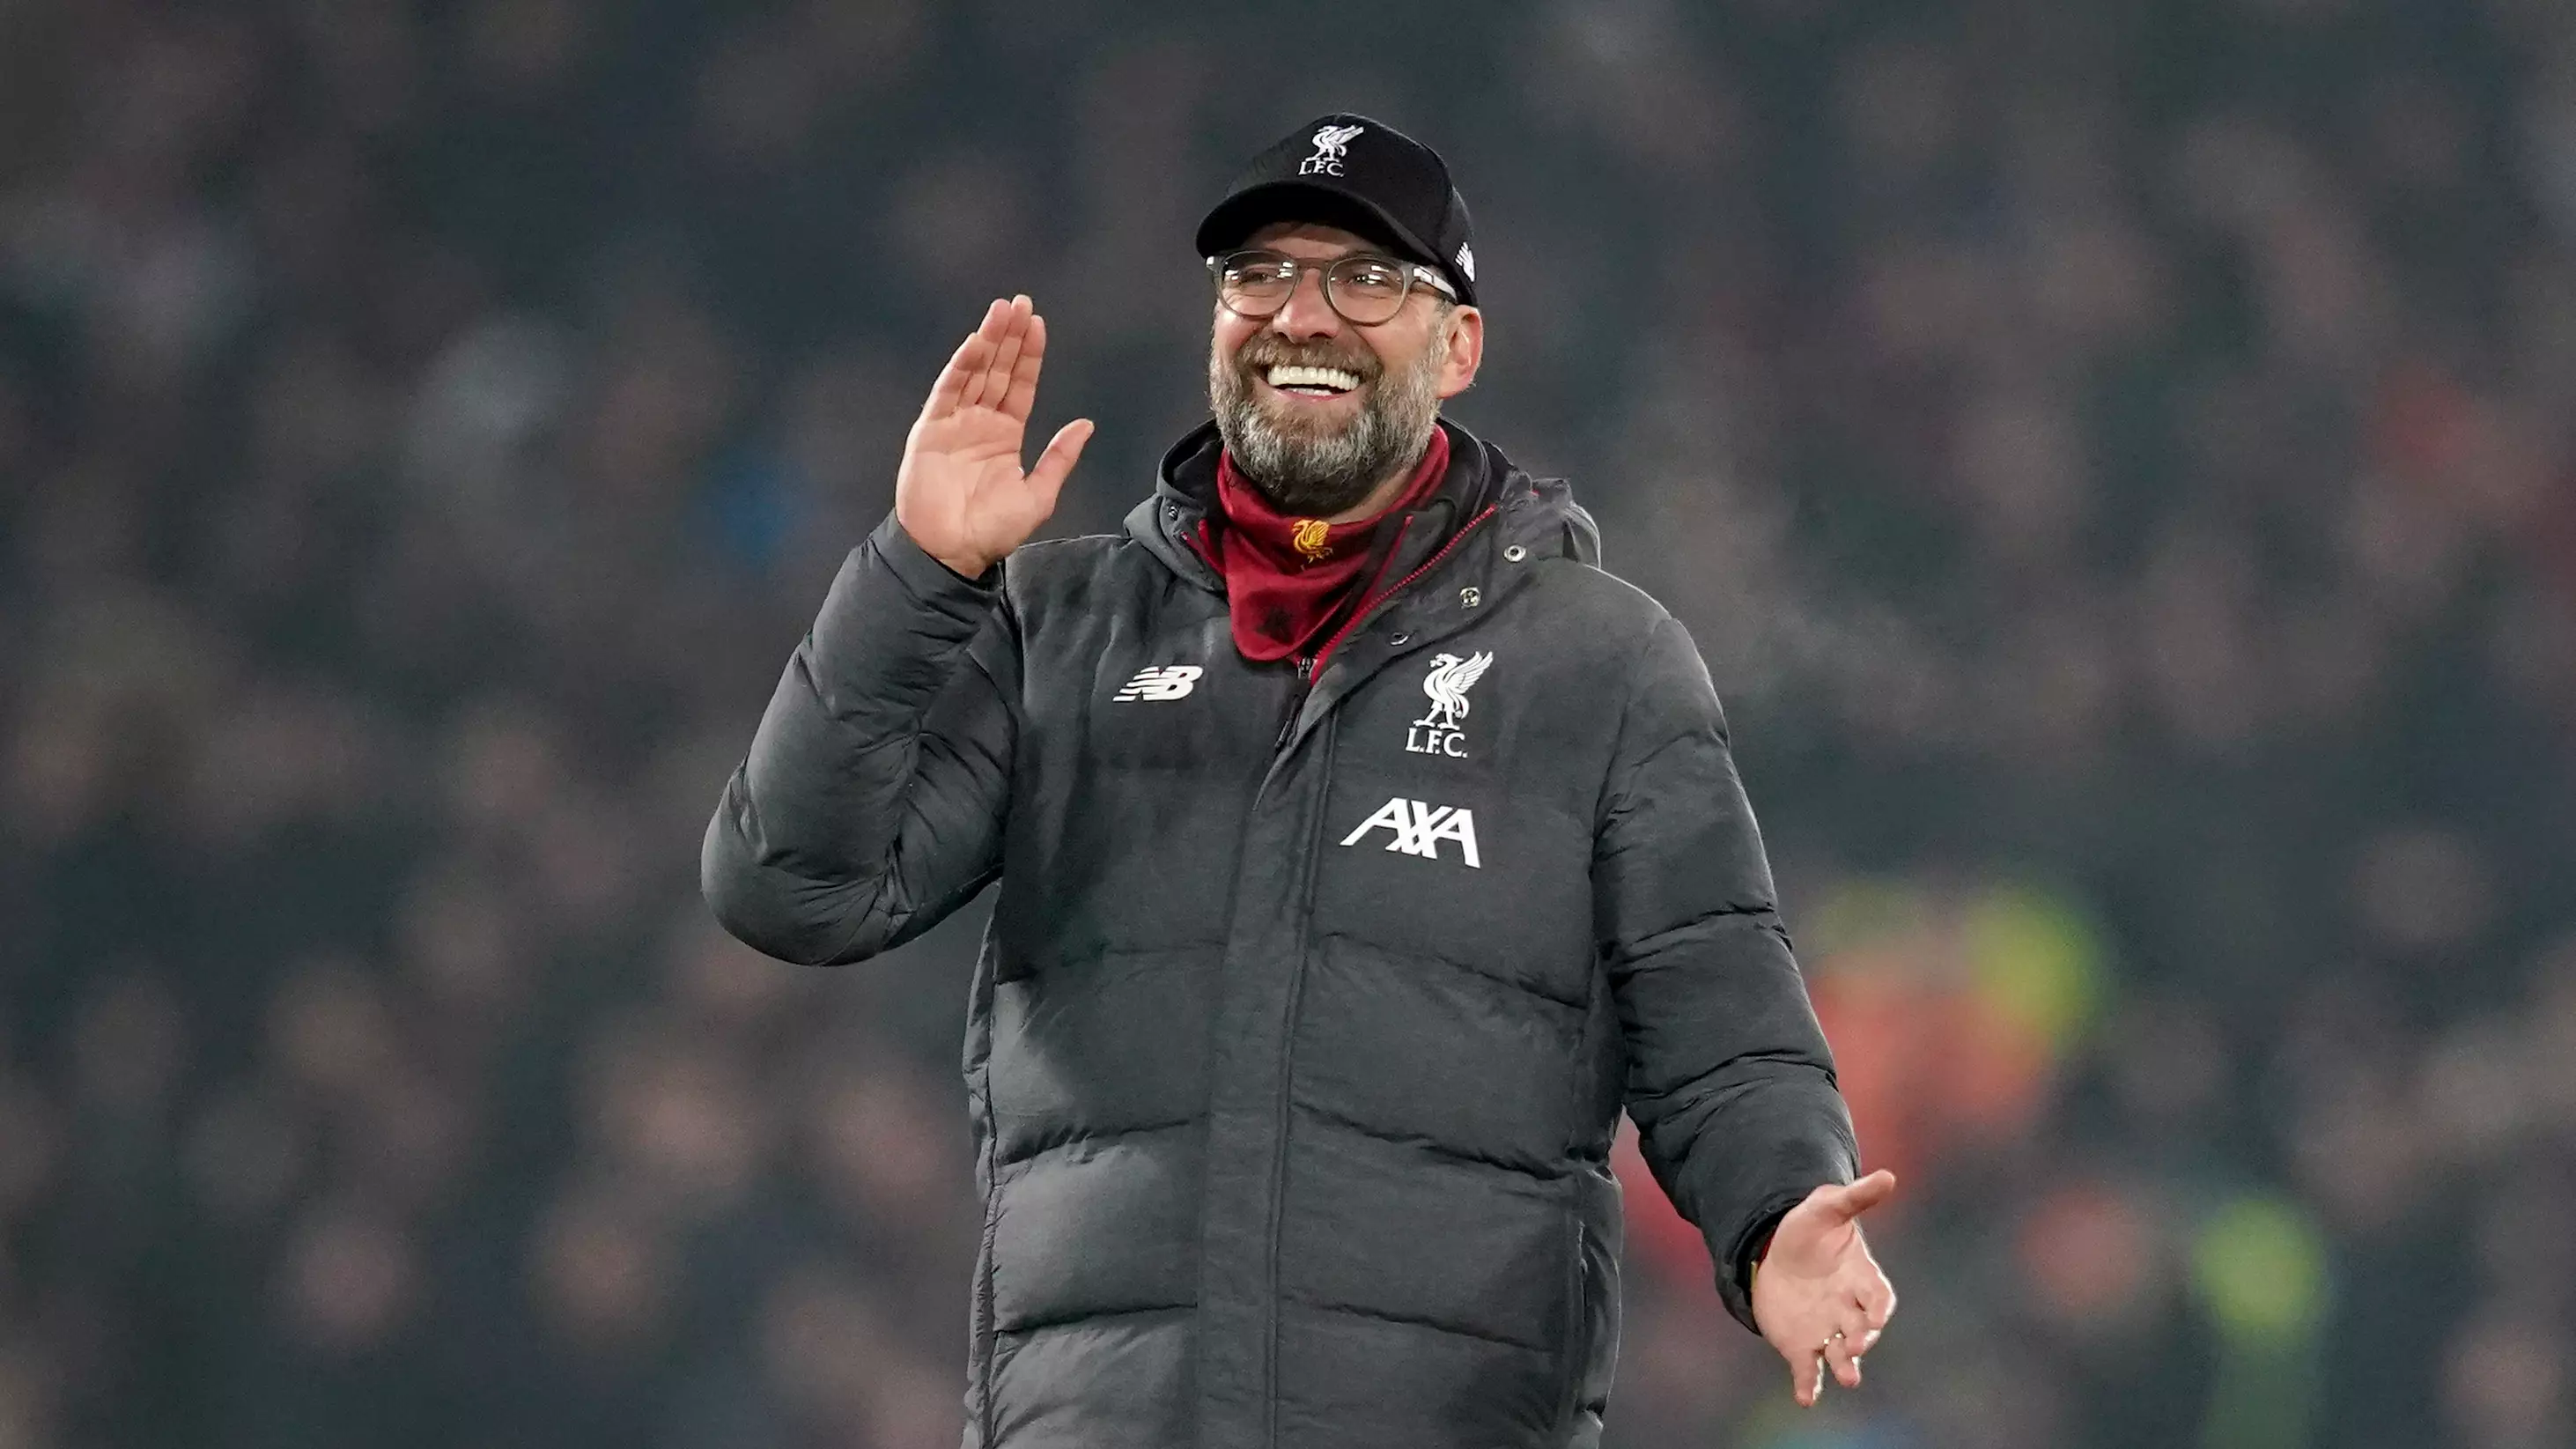 Will Klopp and Liverpool get to celebrate winning the title on the pitch? Image: PA Images